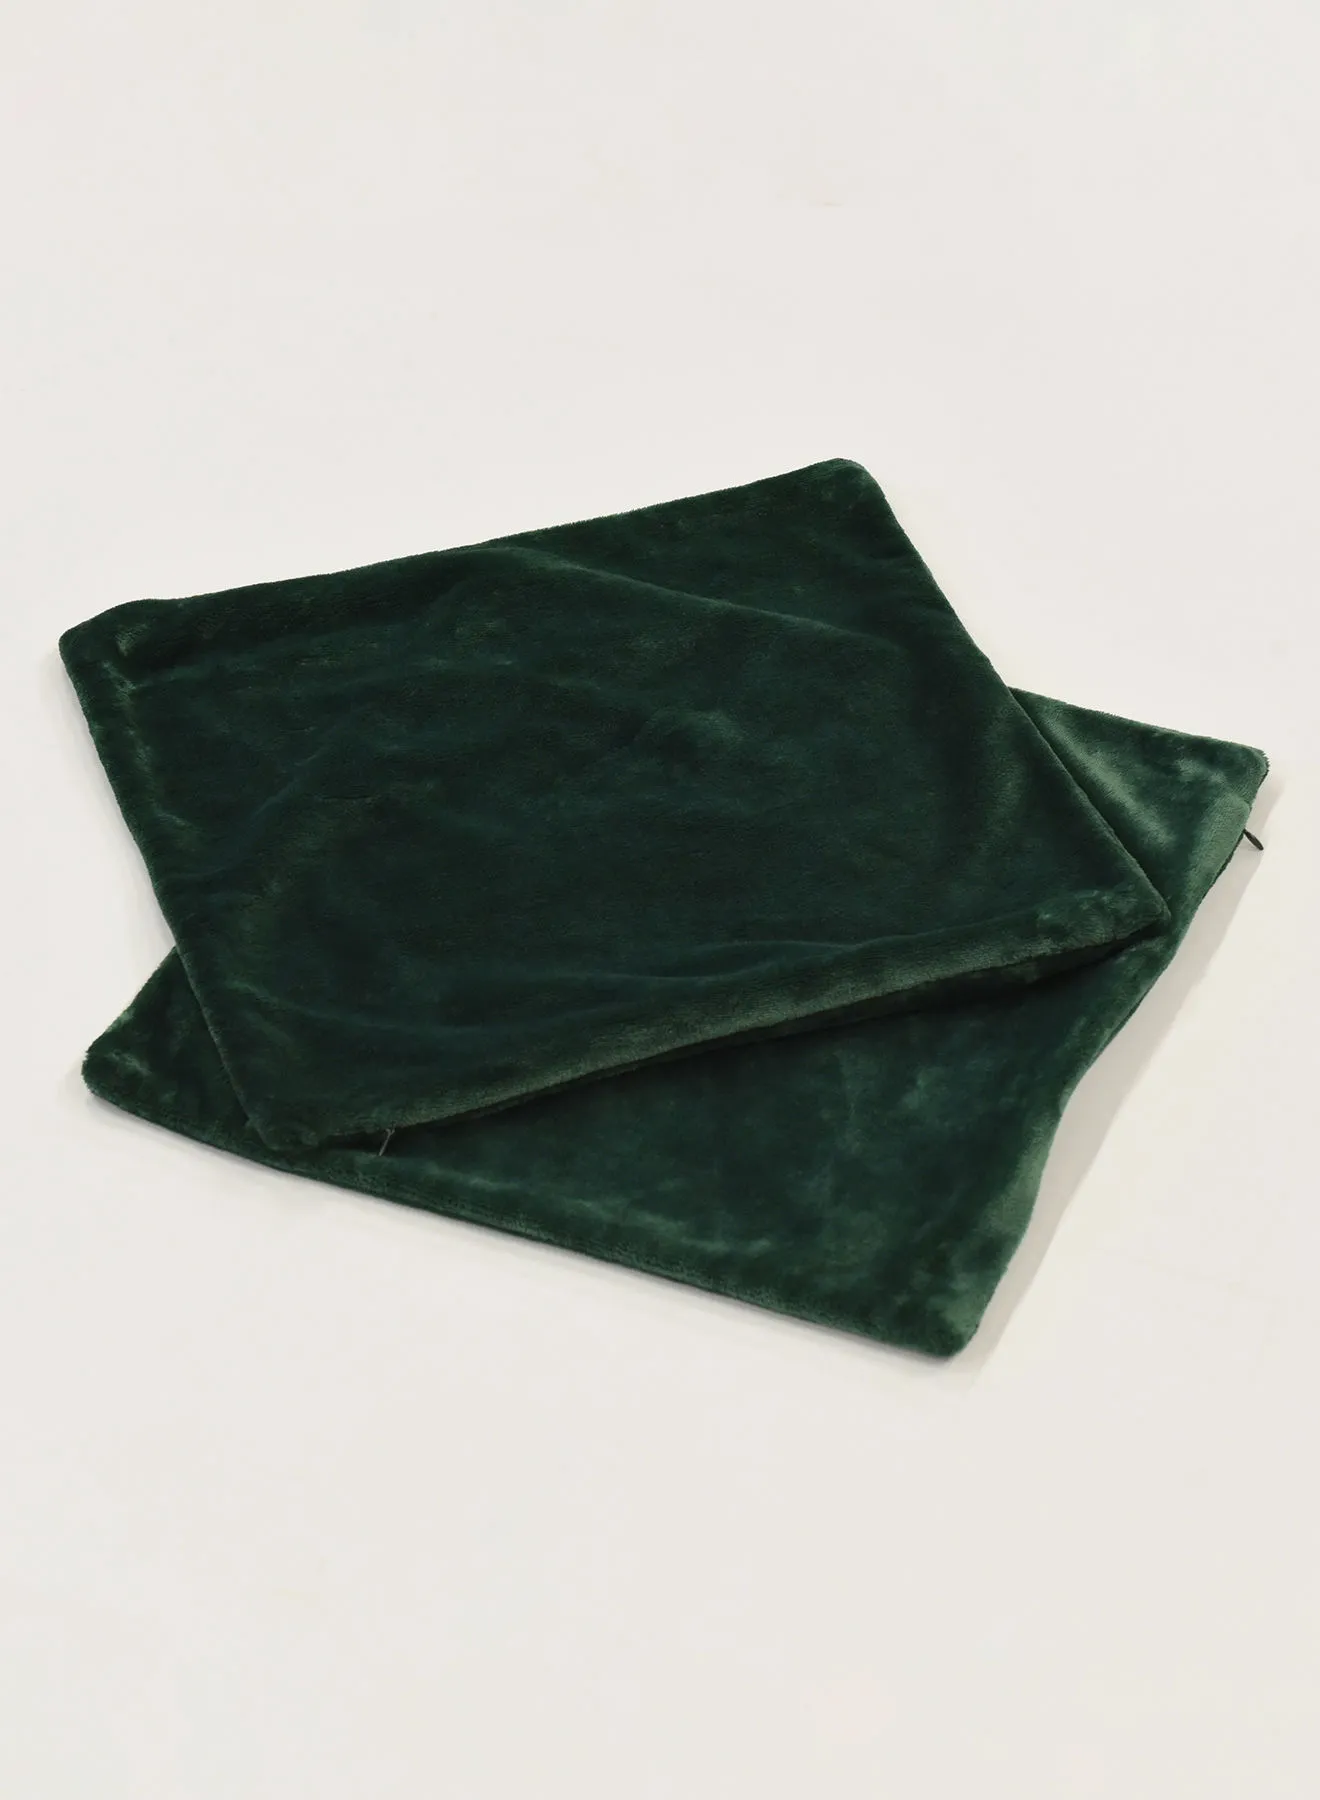 Amal Decorative Cushion Cover - Size 45X45 Cm Green - 100% Polyester 2 Piece - Bedroom Or Living Room Decoration